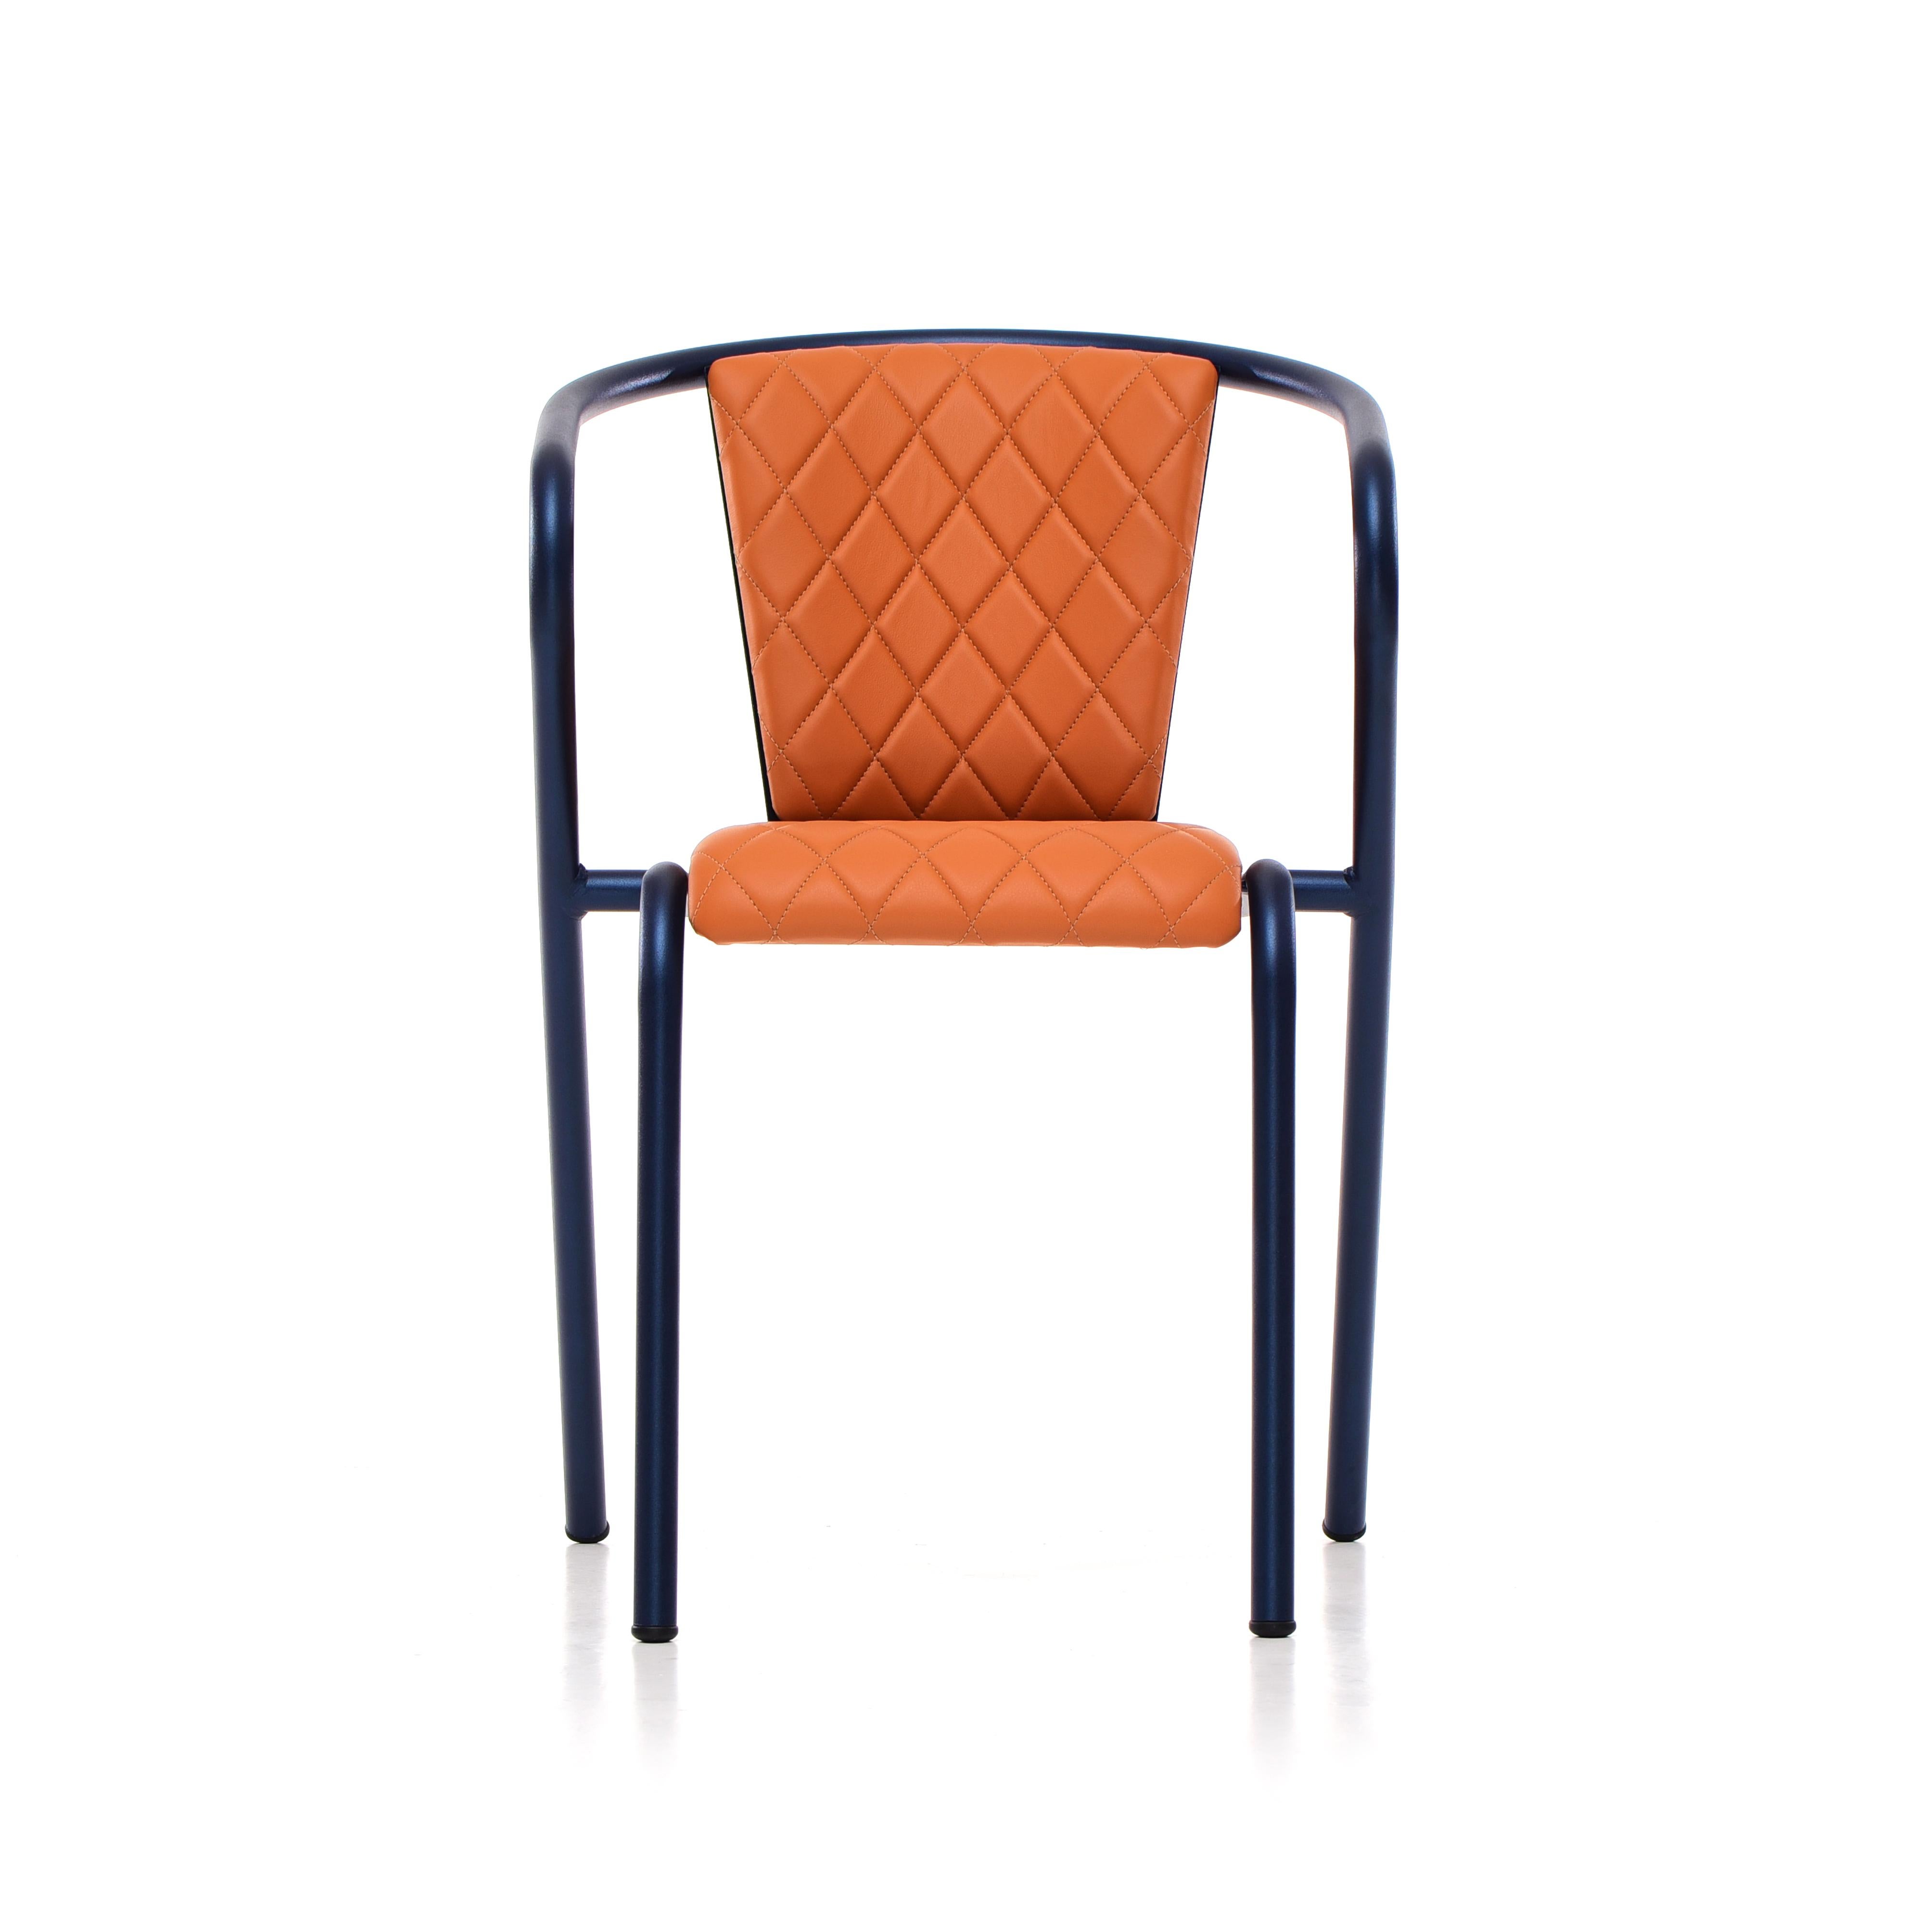 The BICA chair is a comfortable stackable steel dining armchair made from recycled and recyclable steel, finished with our premium selection of powder-coating colors, in this case in a texturized Deep Blue, that transform a classic in something new